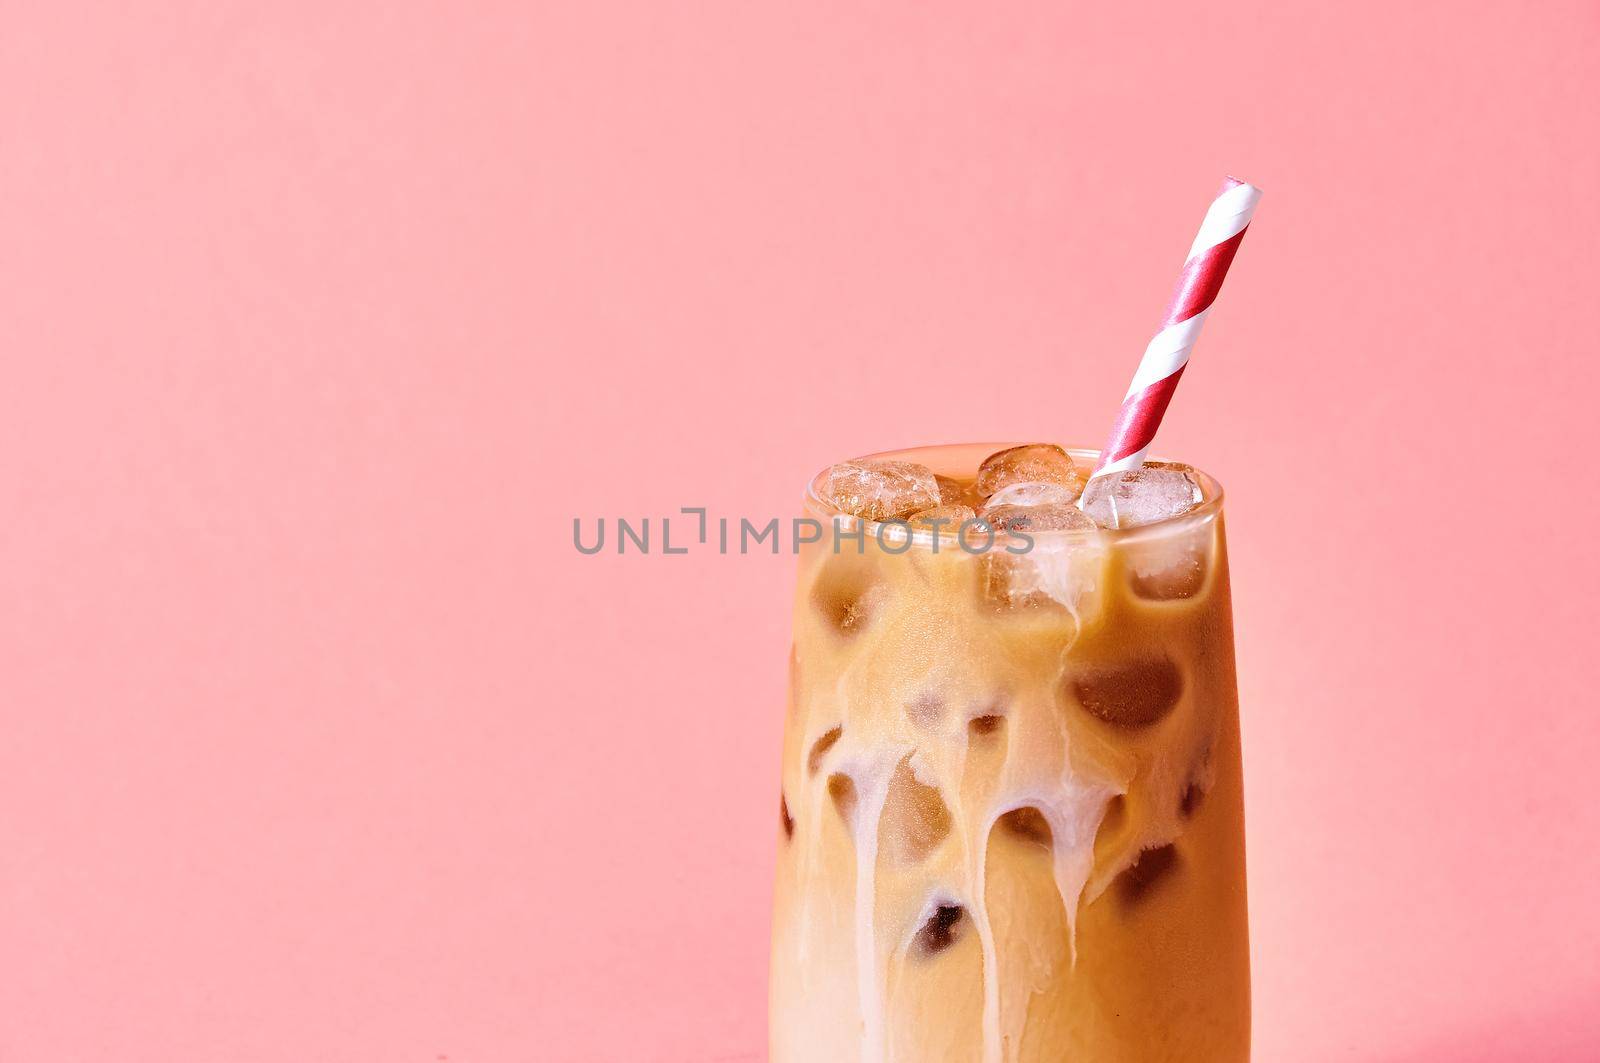 Close-up Iced Coffee with Milk in Tall Glasses on Pink Background. Concept Refreshing Summer Drink.